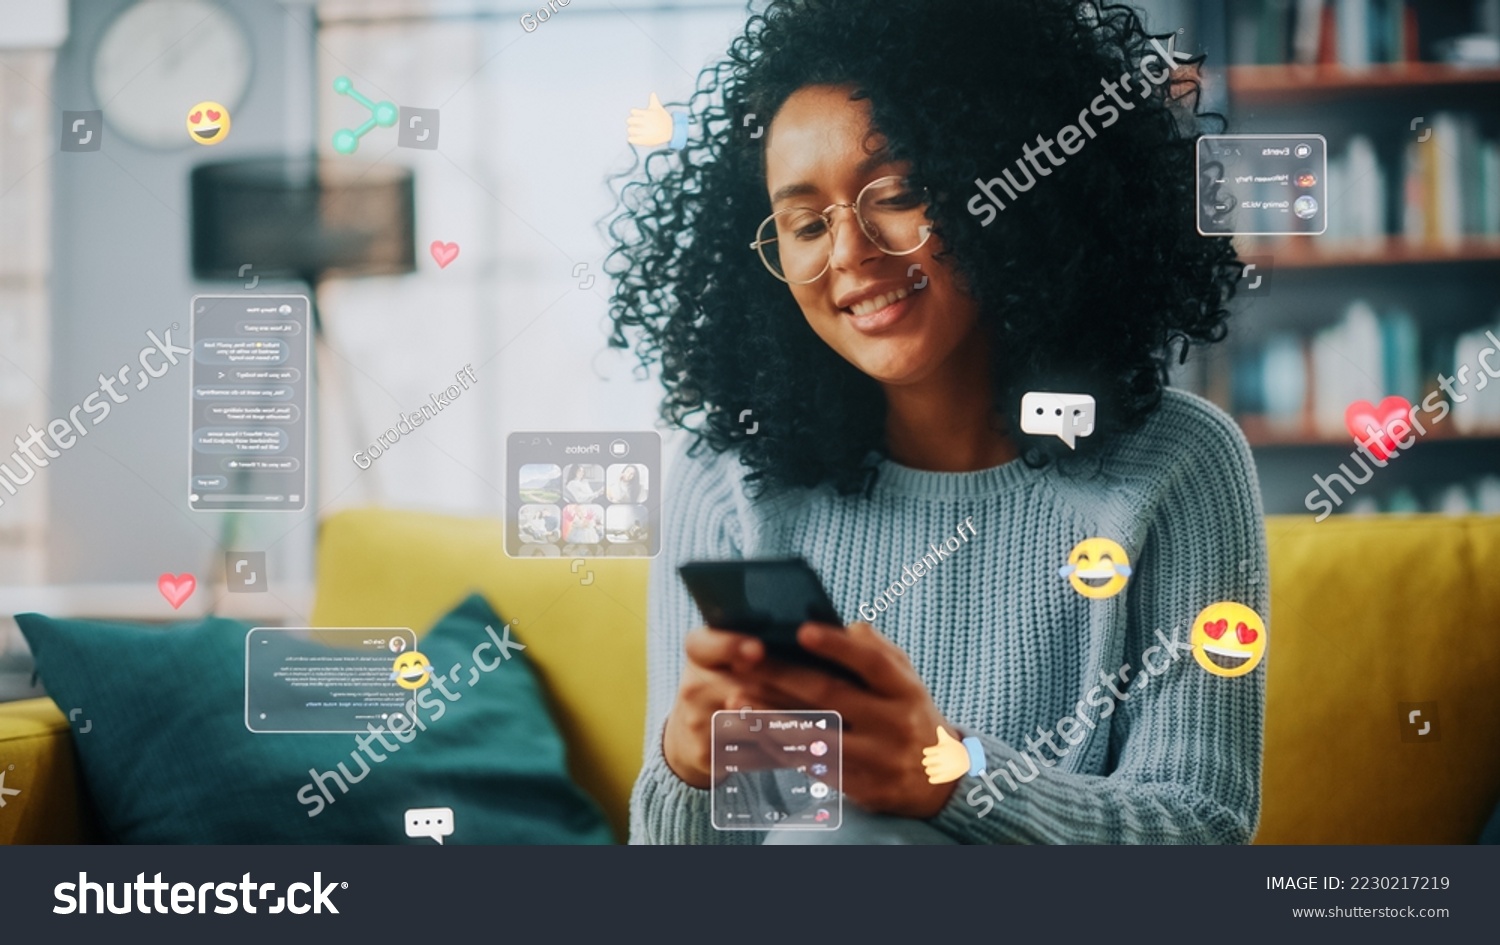 Social Media Visualization Concept: Happy Black Woman Uses Smartphone at Home. 3D Representation of Social Media Posts, Smiley Faces, e-Commerce Online Shopping Digital Icons Flying Around the Device #2230217219